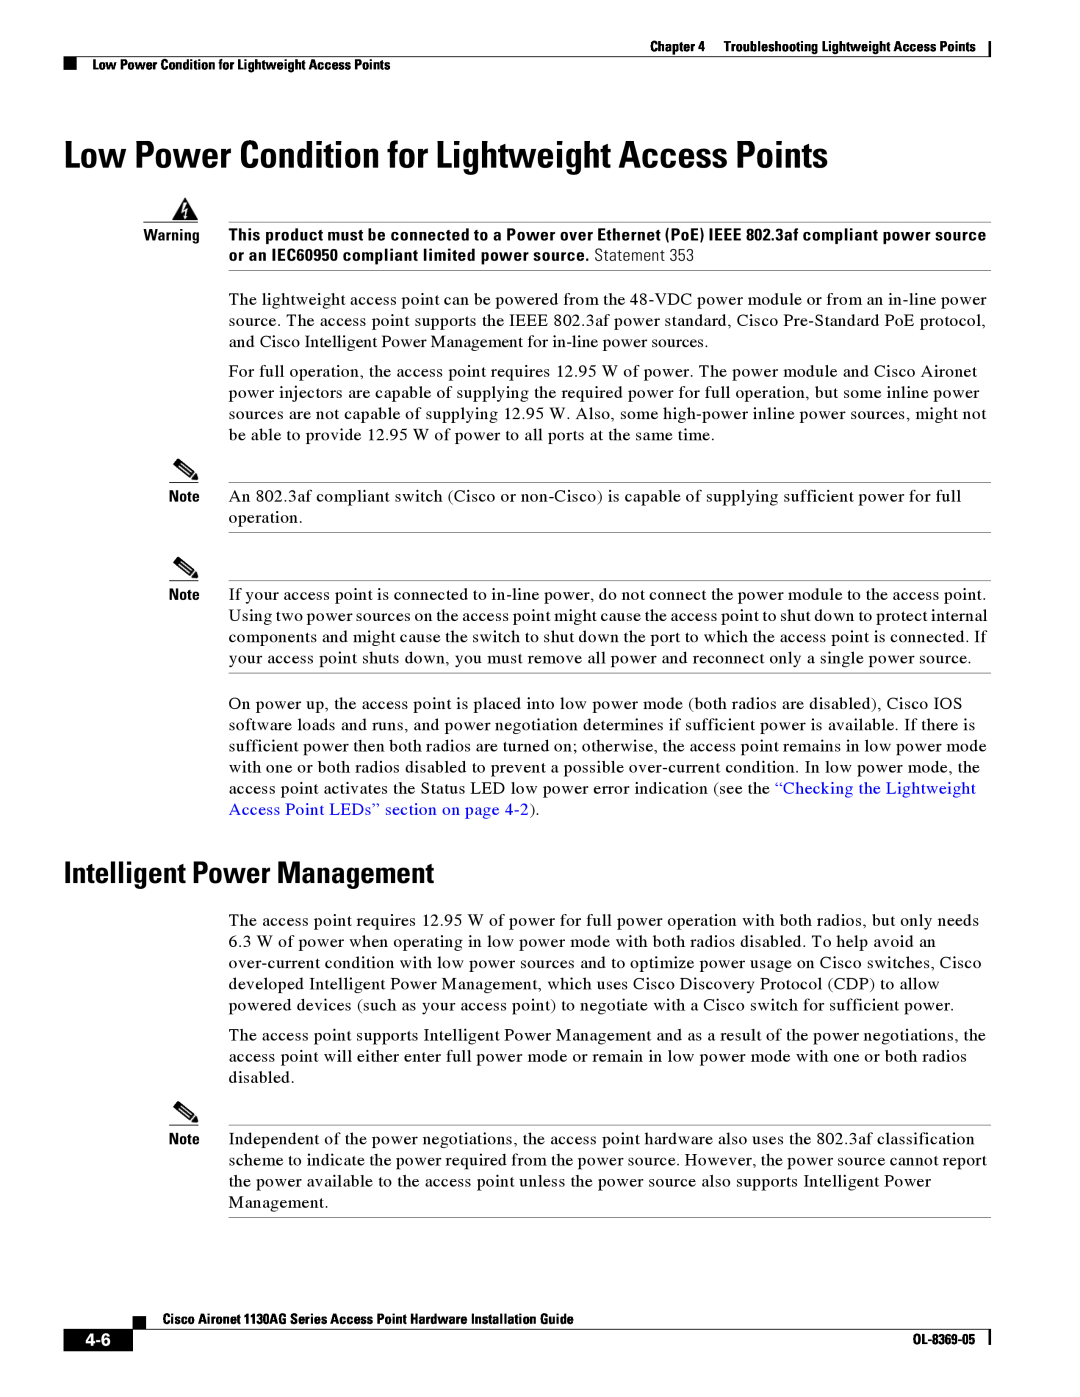 Cisco Systems 1130AG manual Low Power Condition for Lightweight Access Points, Intelligent Power Management 